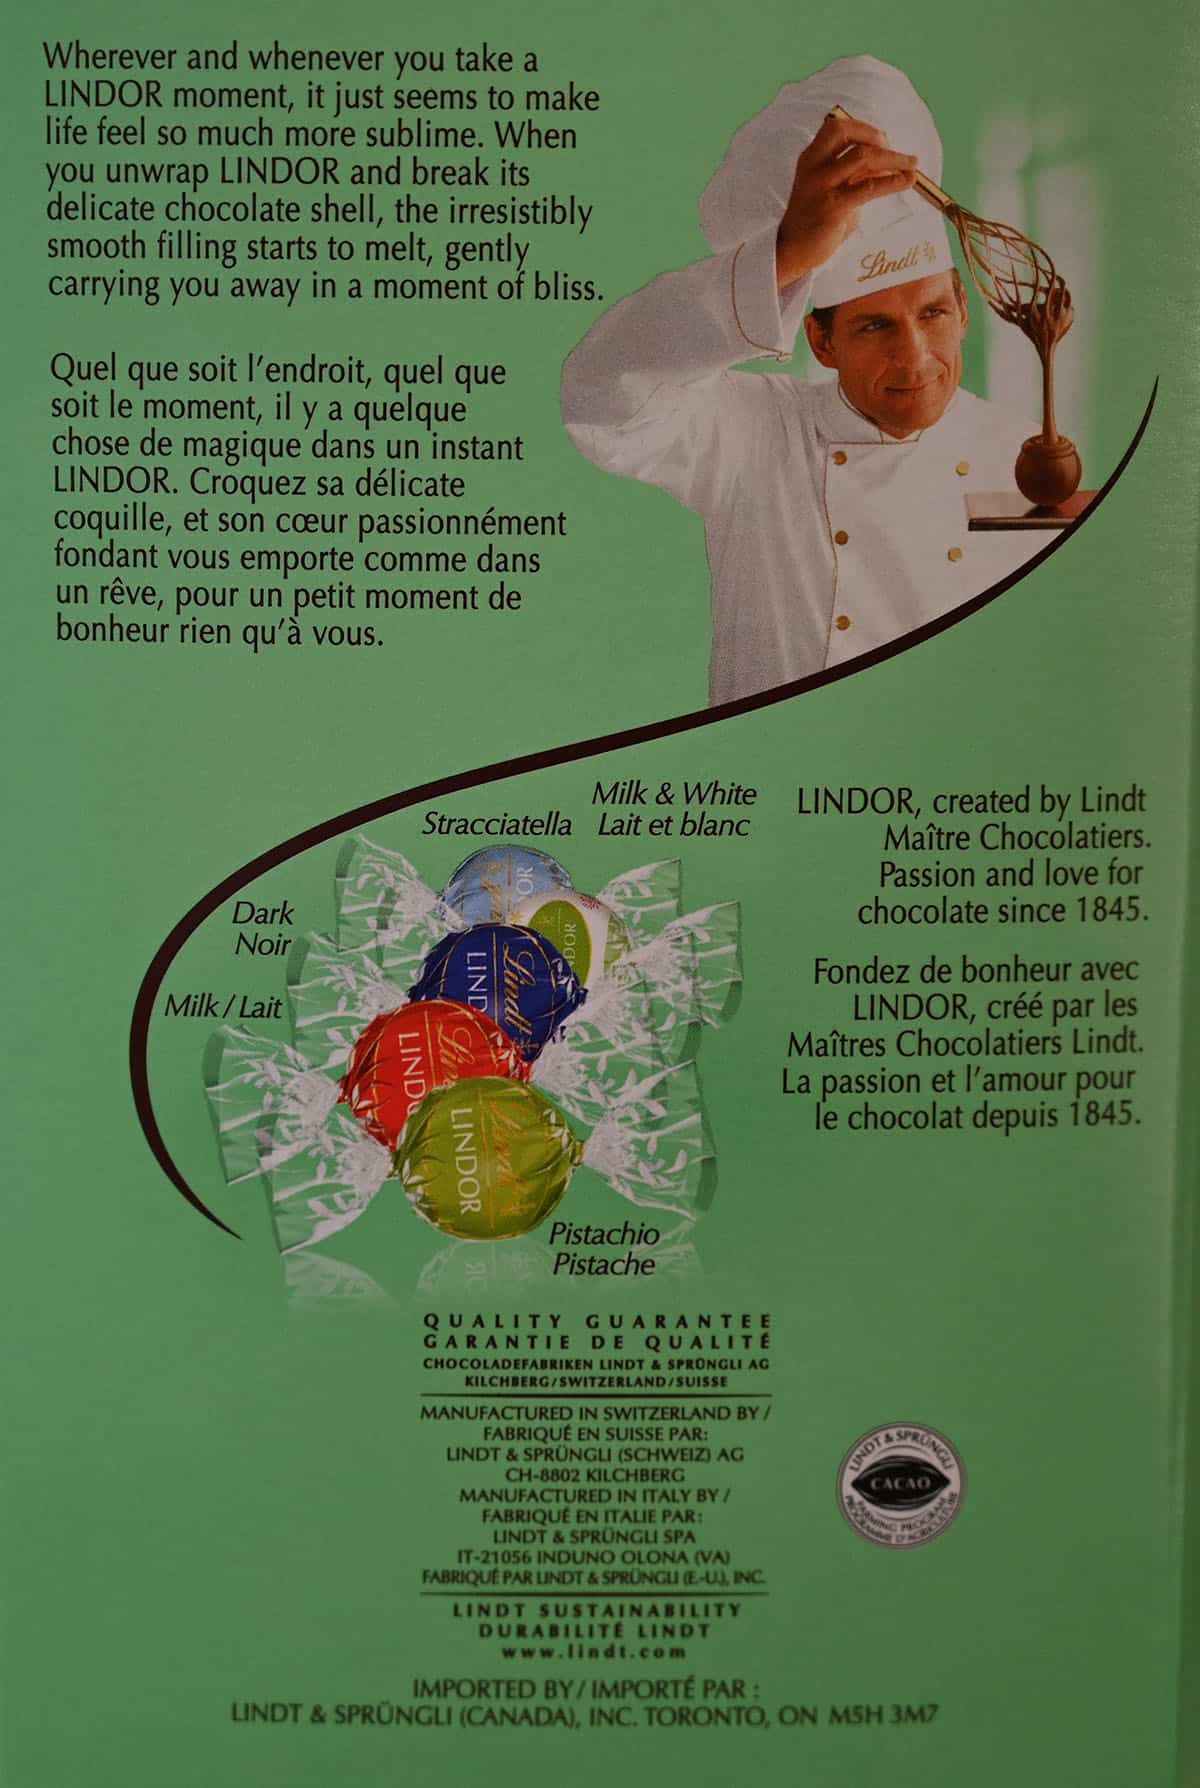 Image of the Easter limited edition product description from the back of the box.